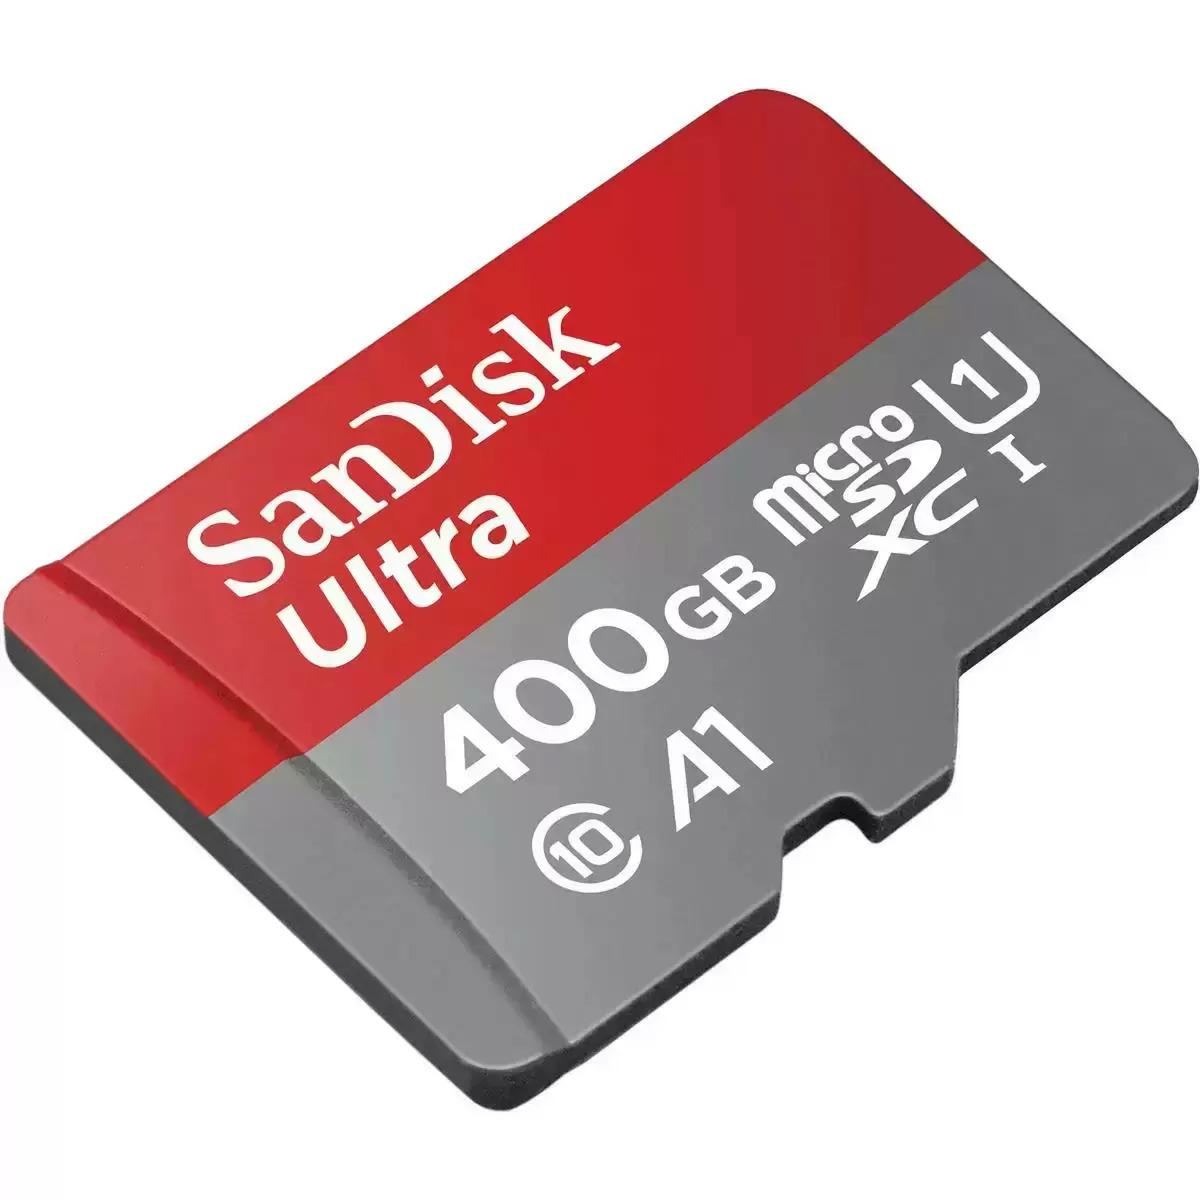 400GB SanDisk Ultra UHS-1 MicroSDXC Memory Card with Adapter for $29.99 Shipped